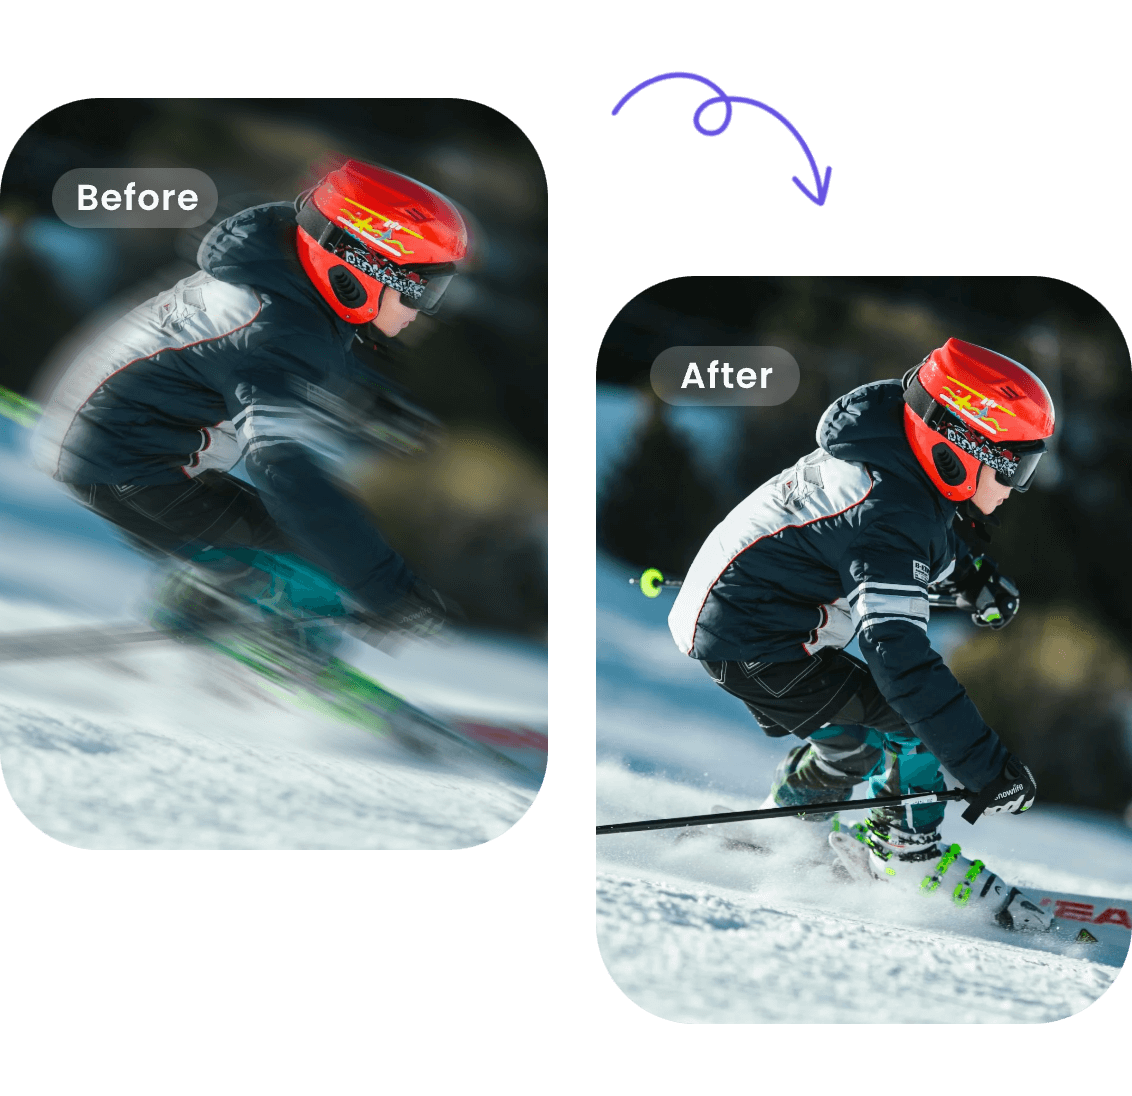 use Clipfly AI video enhancer to enhance slow-motion footage in a ski video